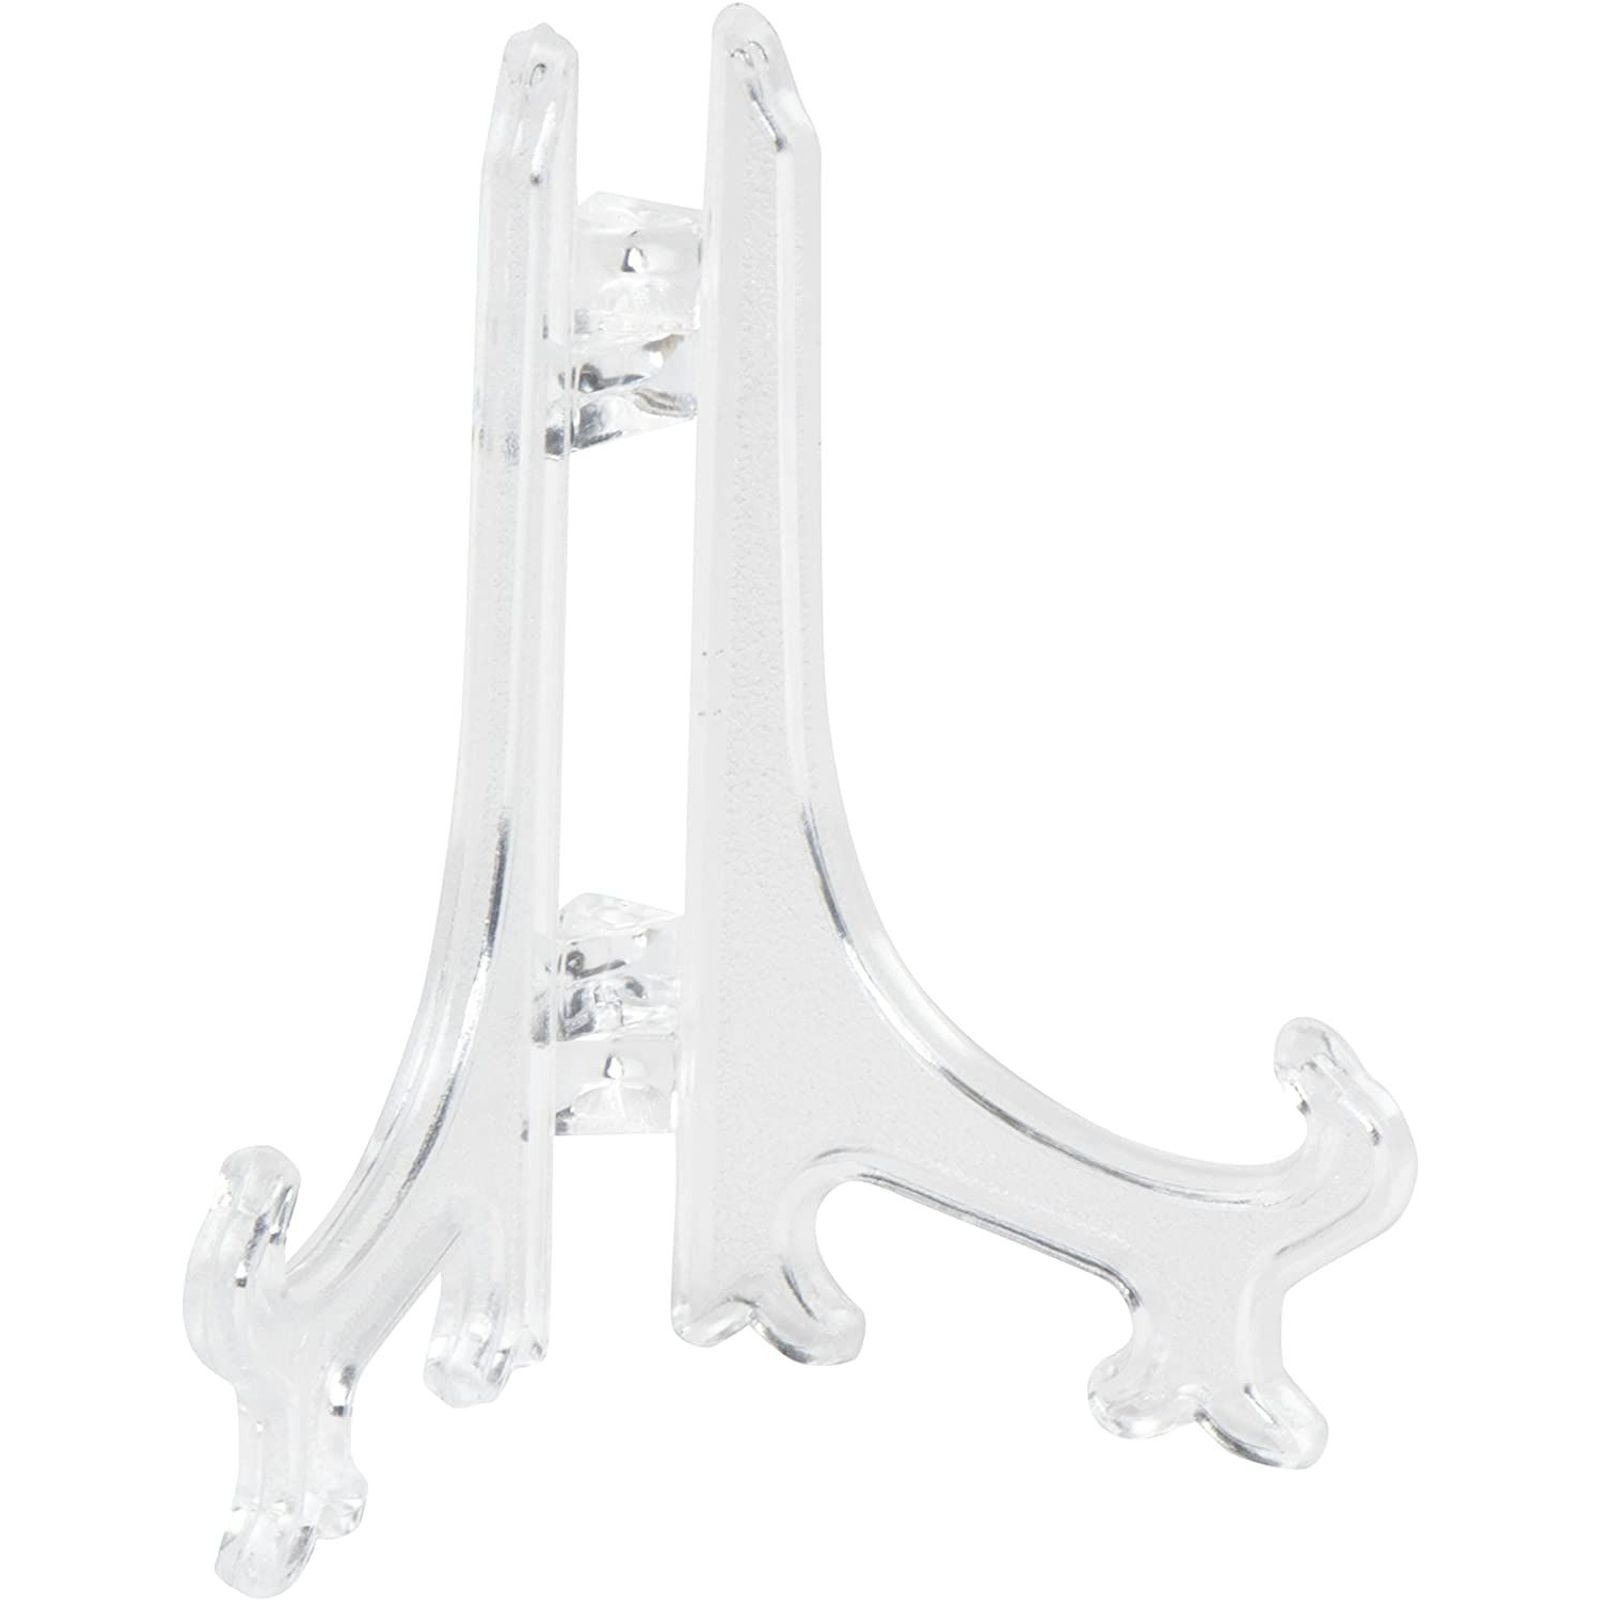 4-Count Acrylic Mini Easel Stand Clear 4-Inch 